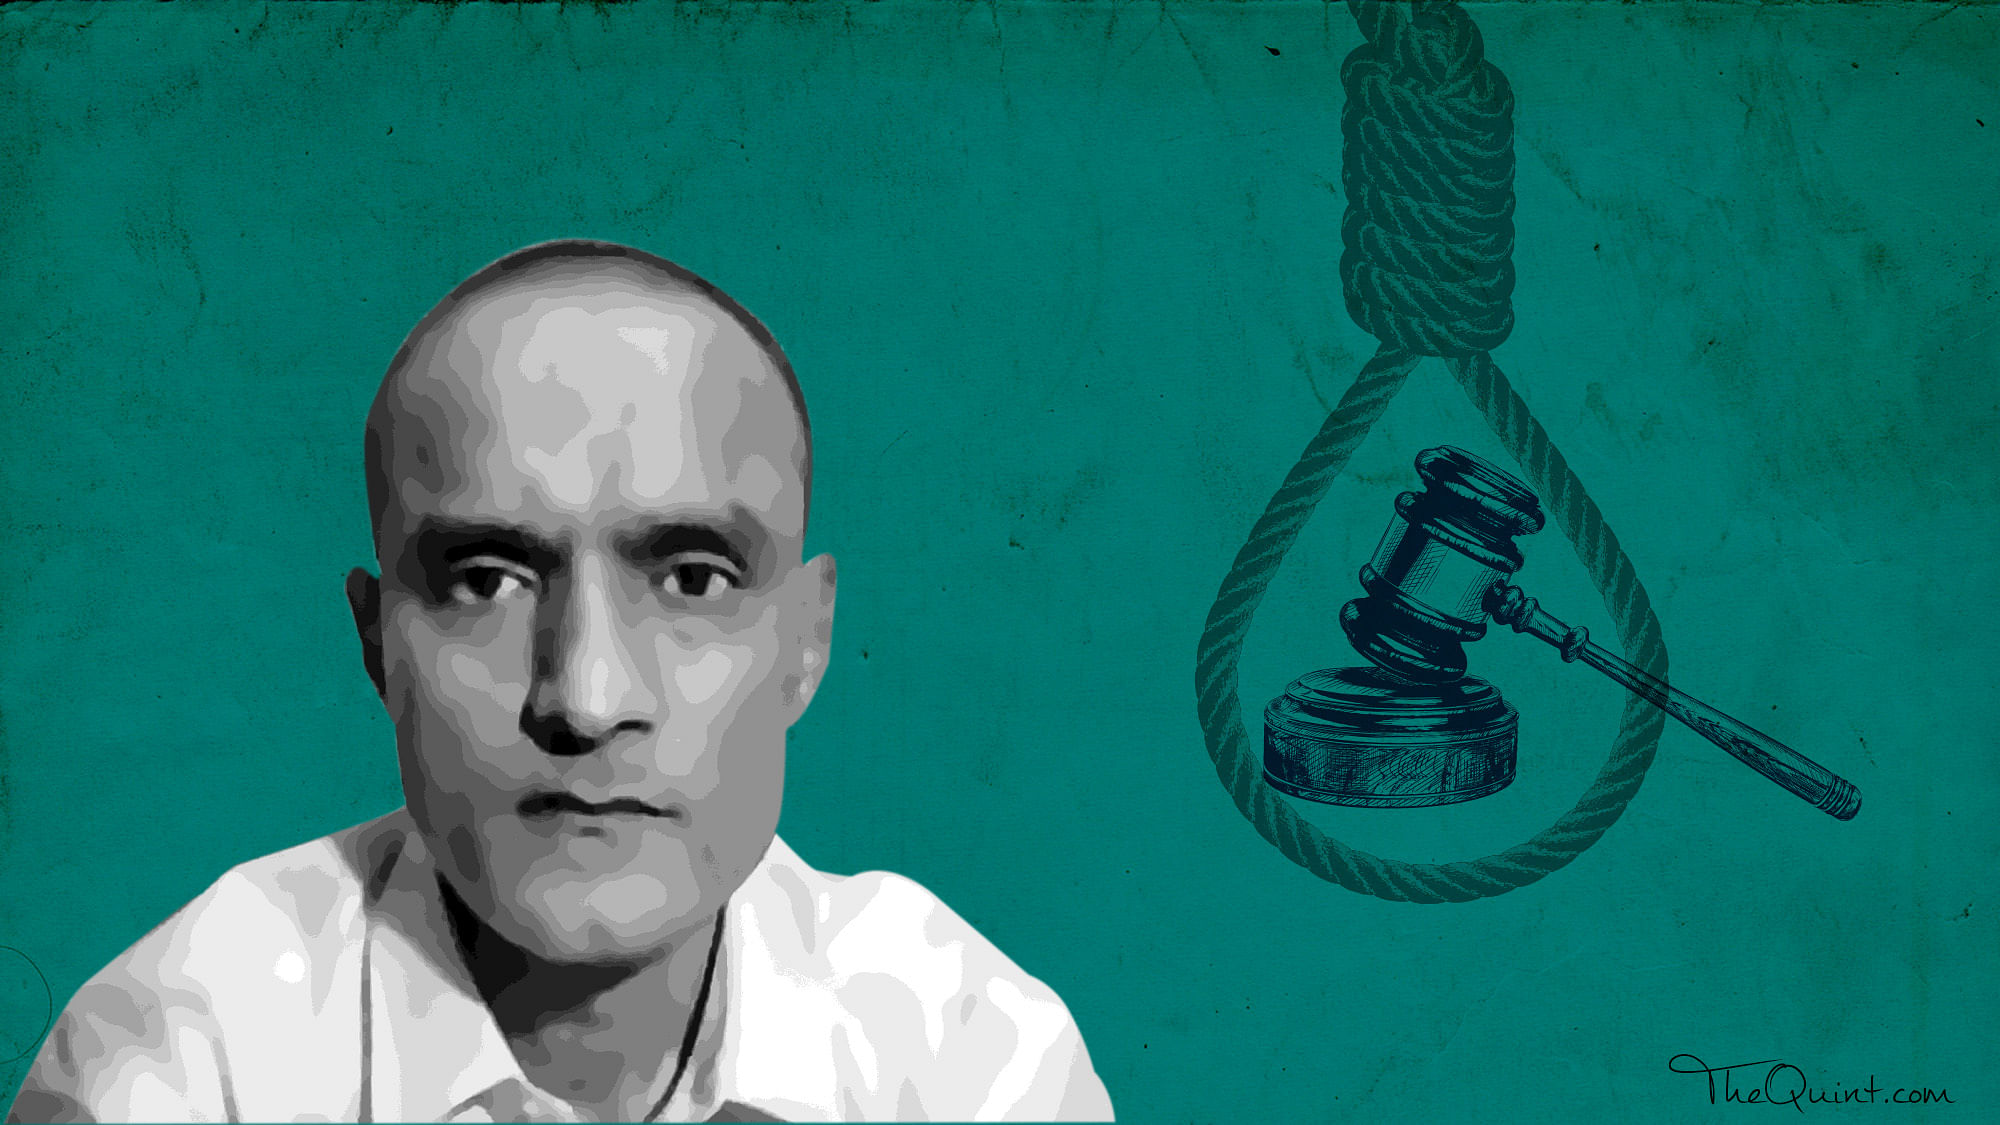 Kulbhushan Jadhav, who Islamabad claims is an Indian spy, was on Monday sentenced to death by a Pakistani military court for espionage and engaging. (Photo: <b>The Quint</b>)